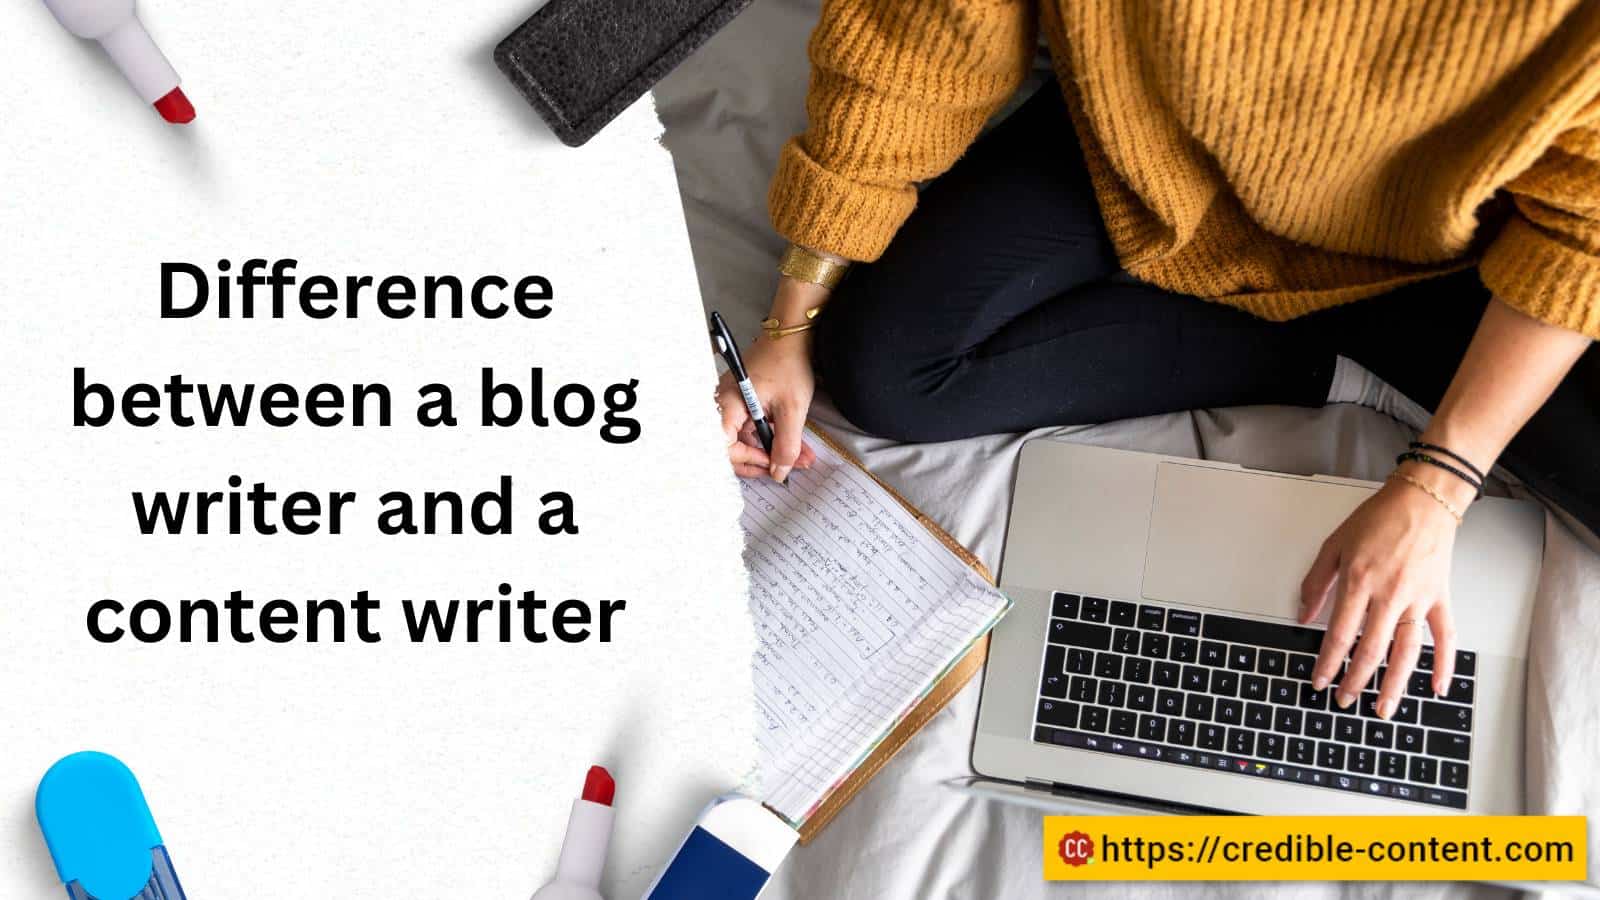 Difference between a blog writer and a content writer